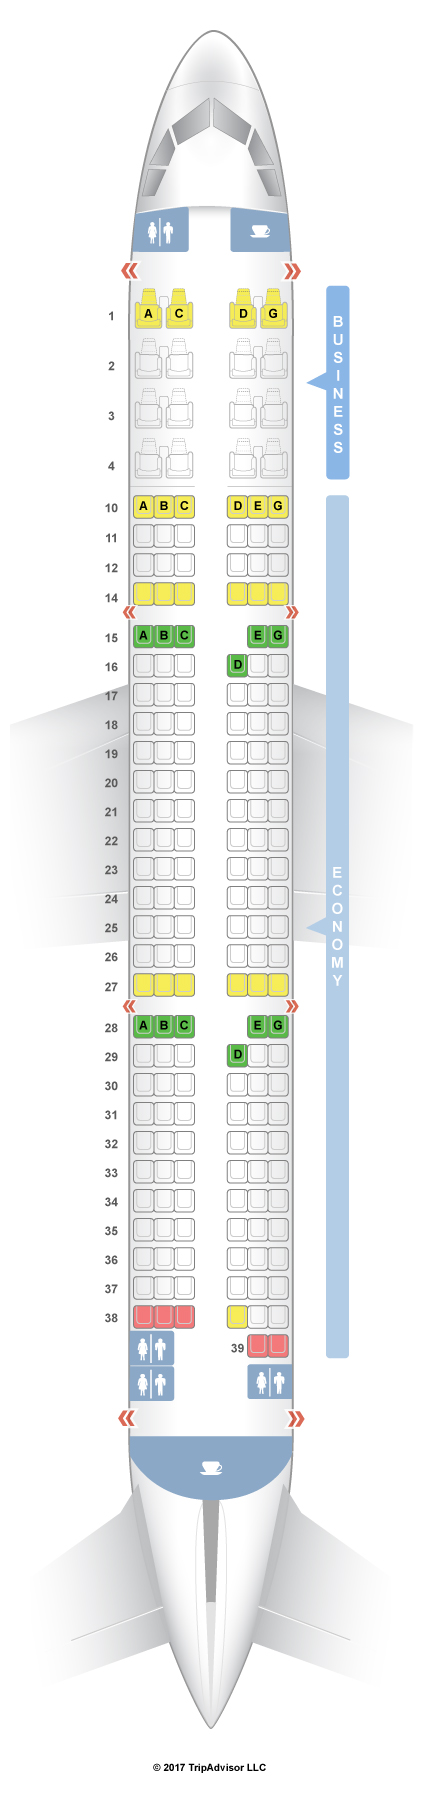 Vietnam Airlines Airbus A321 Seating Chart